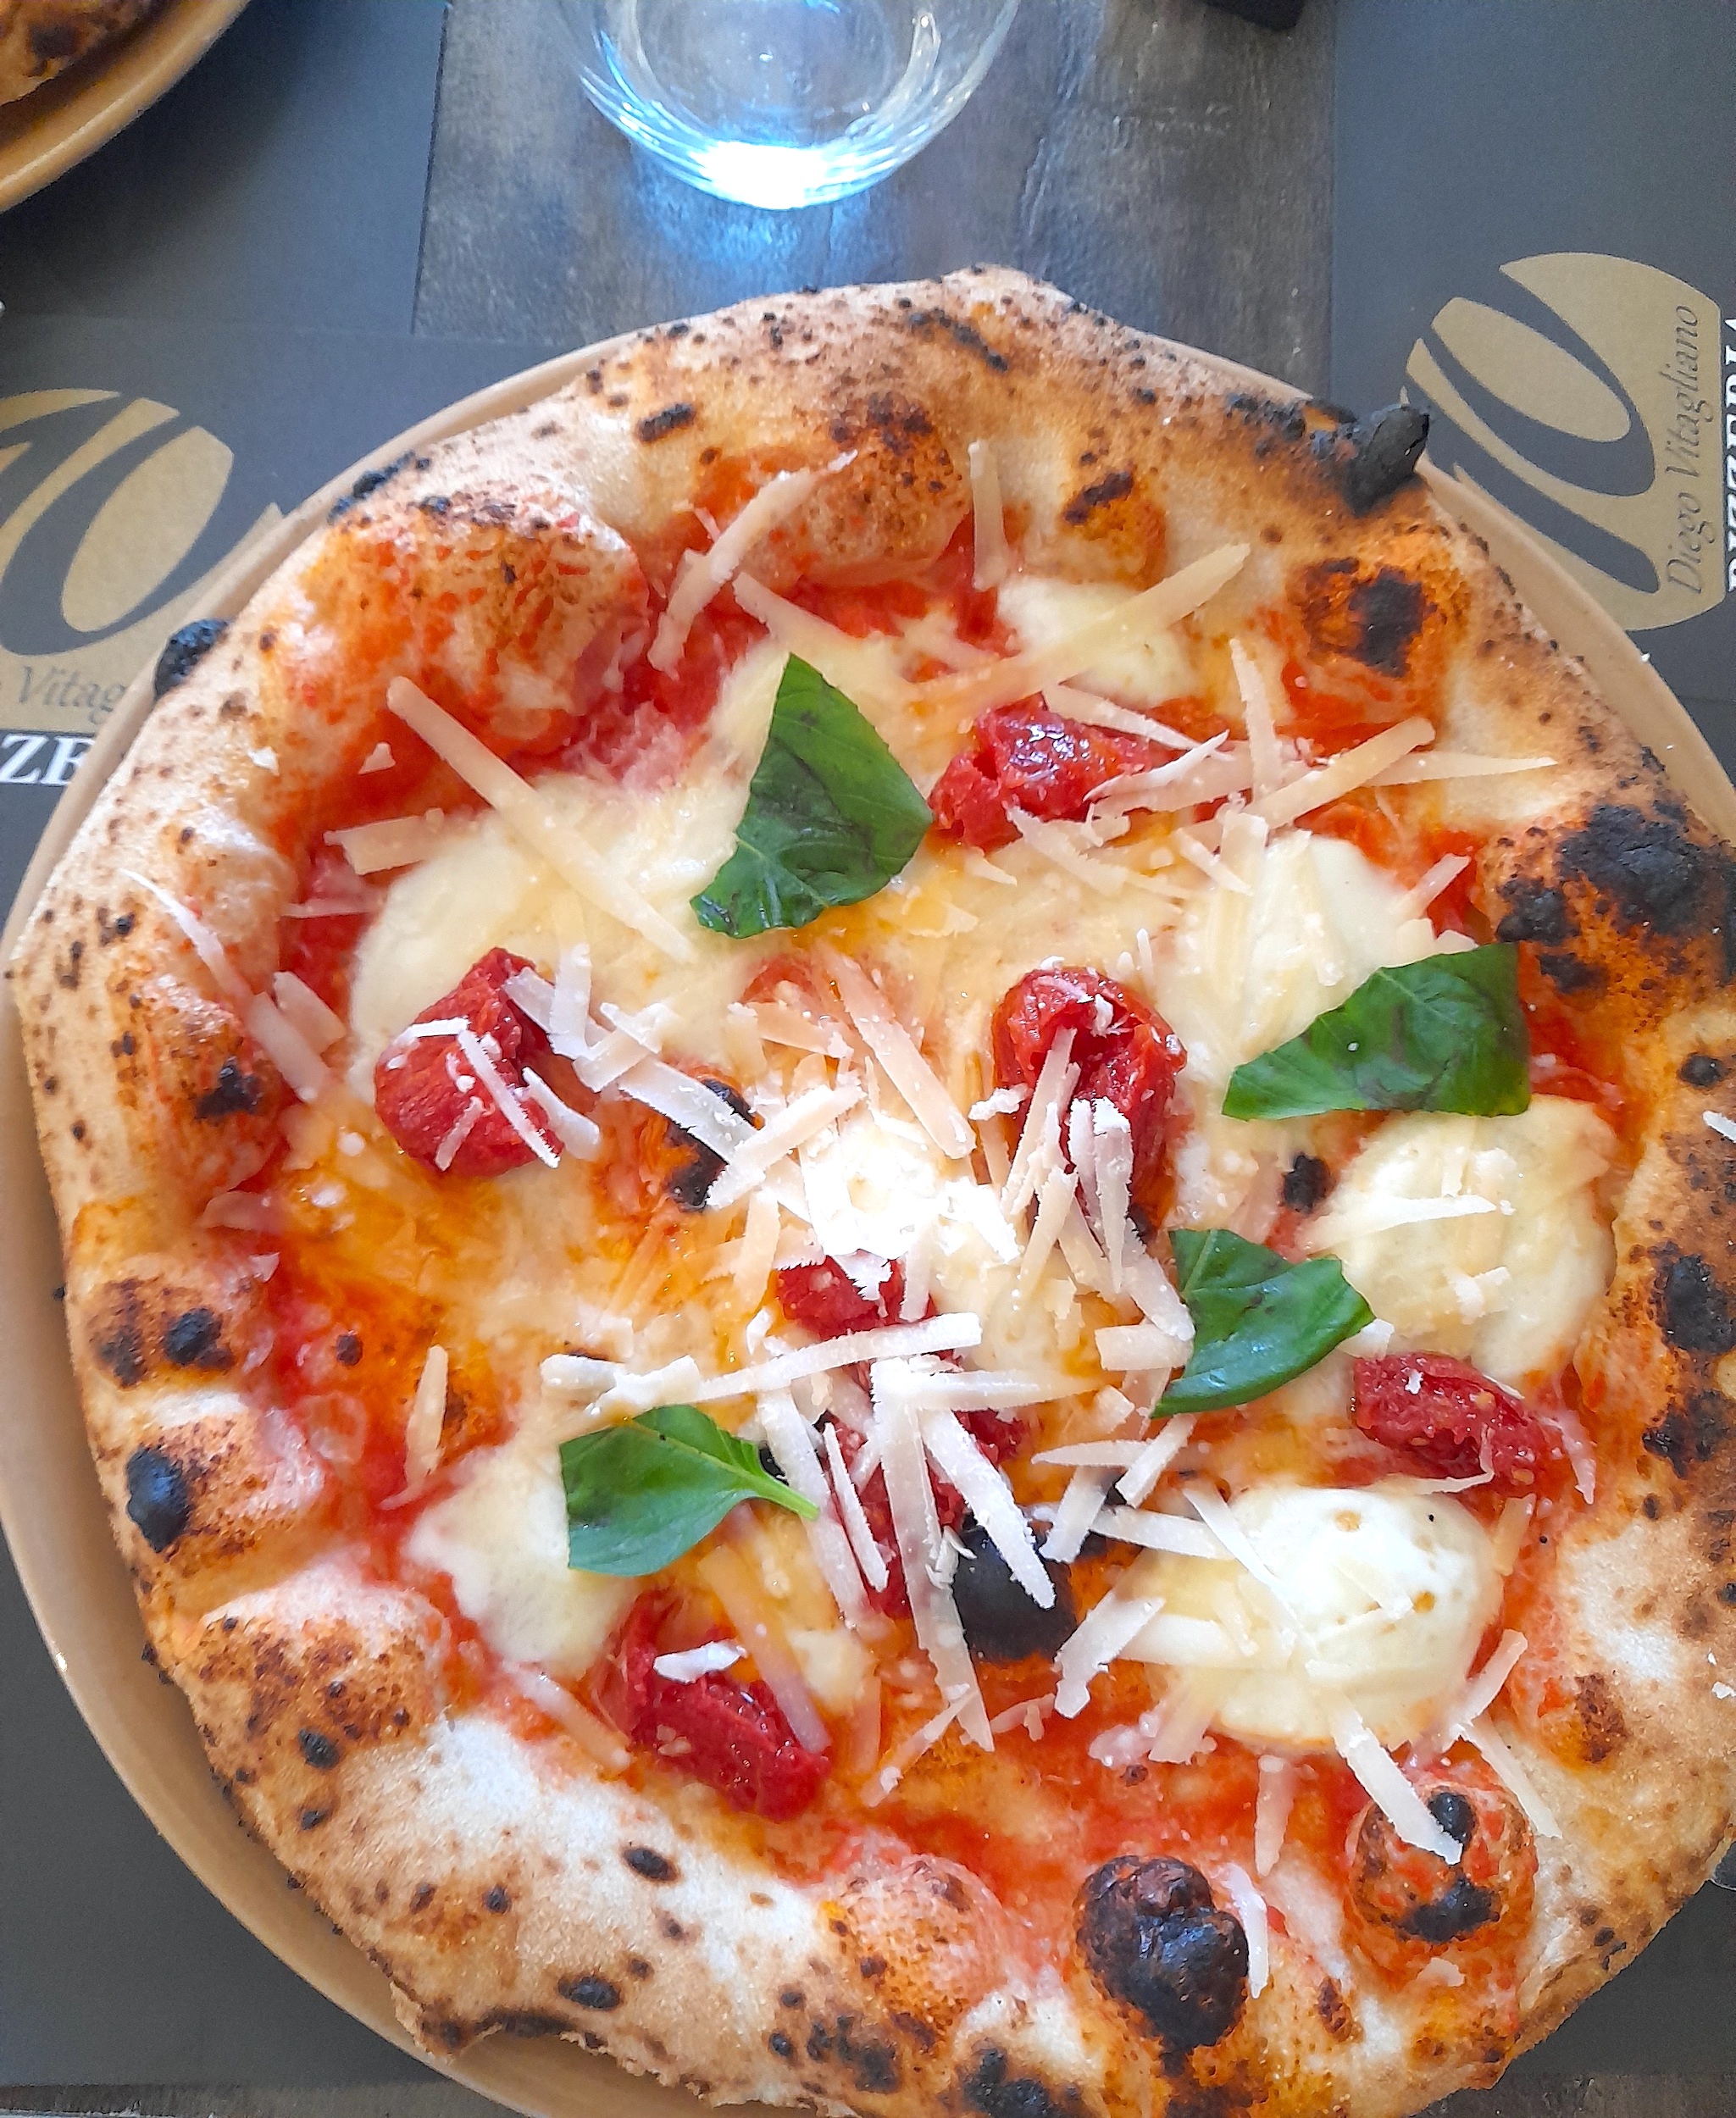 10 Diego Vitagliano  Must-Try Pizzeria in Naples - Our Edible Italy